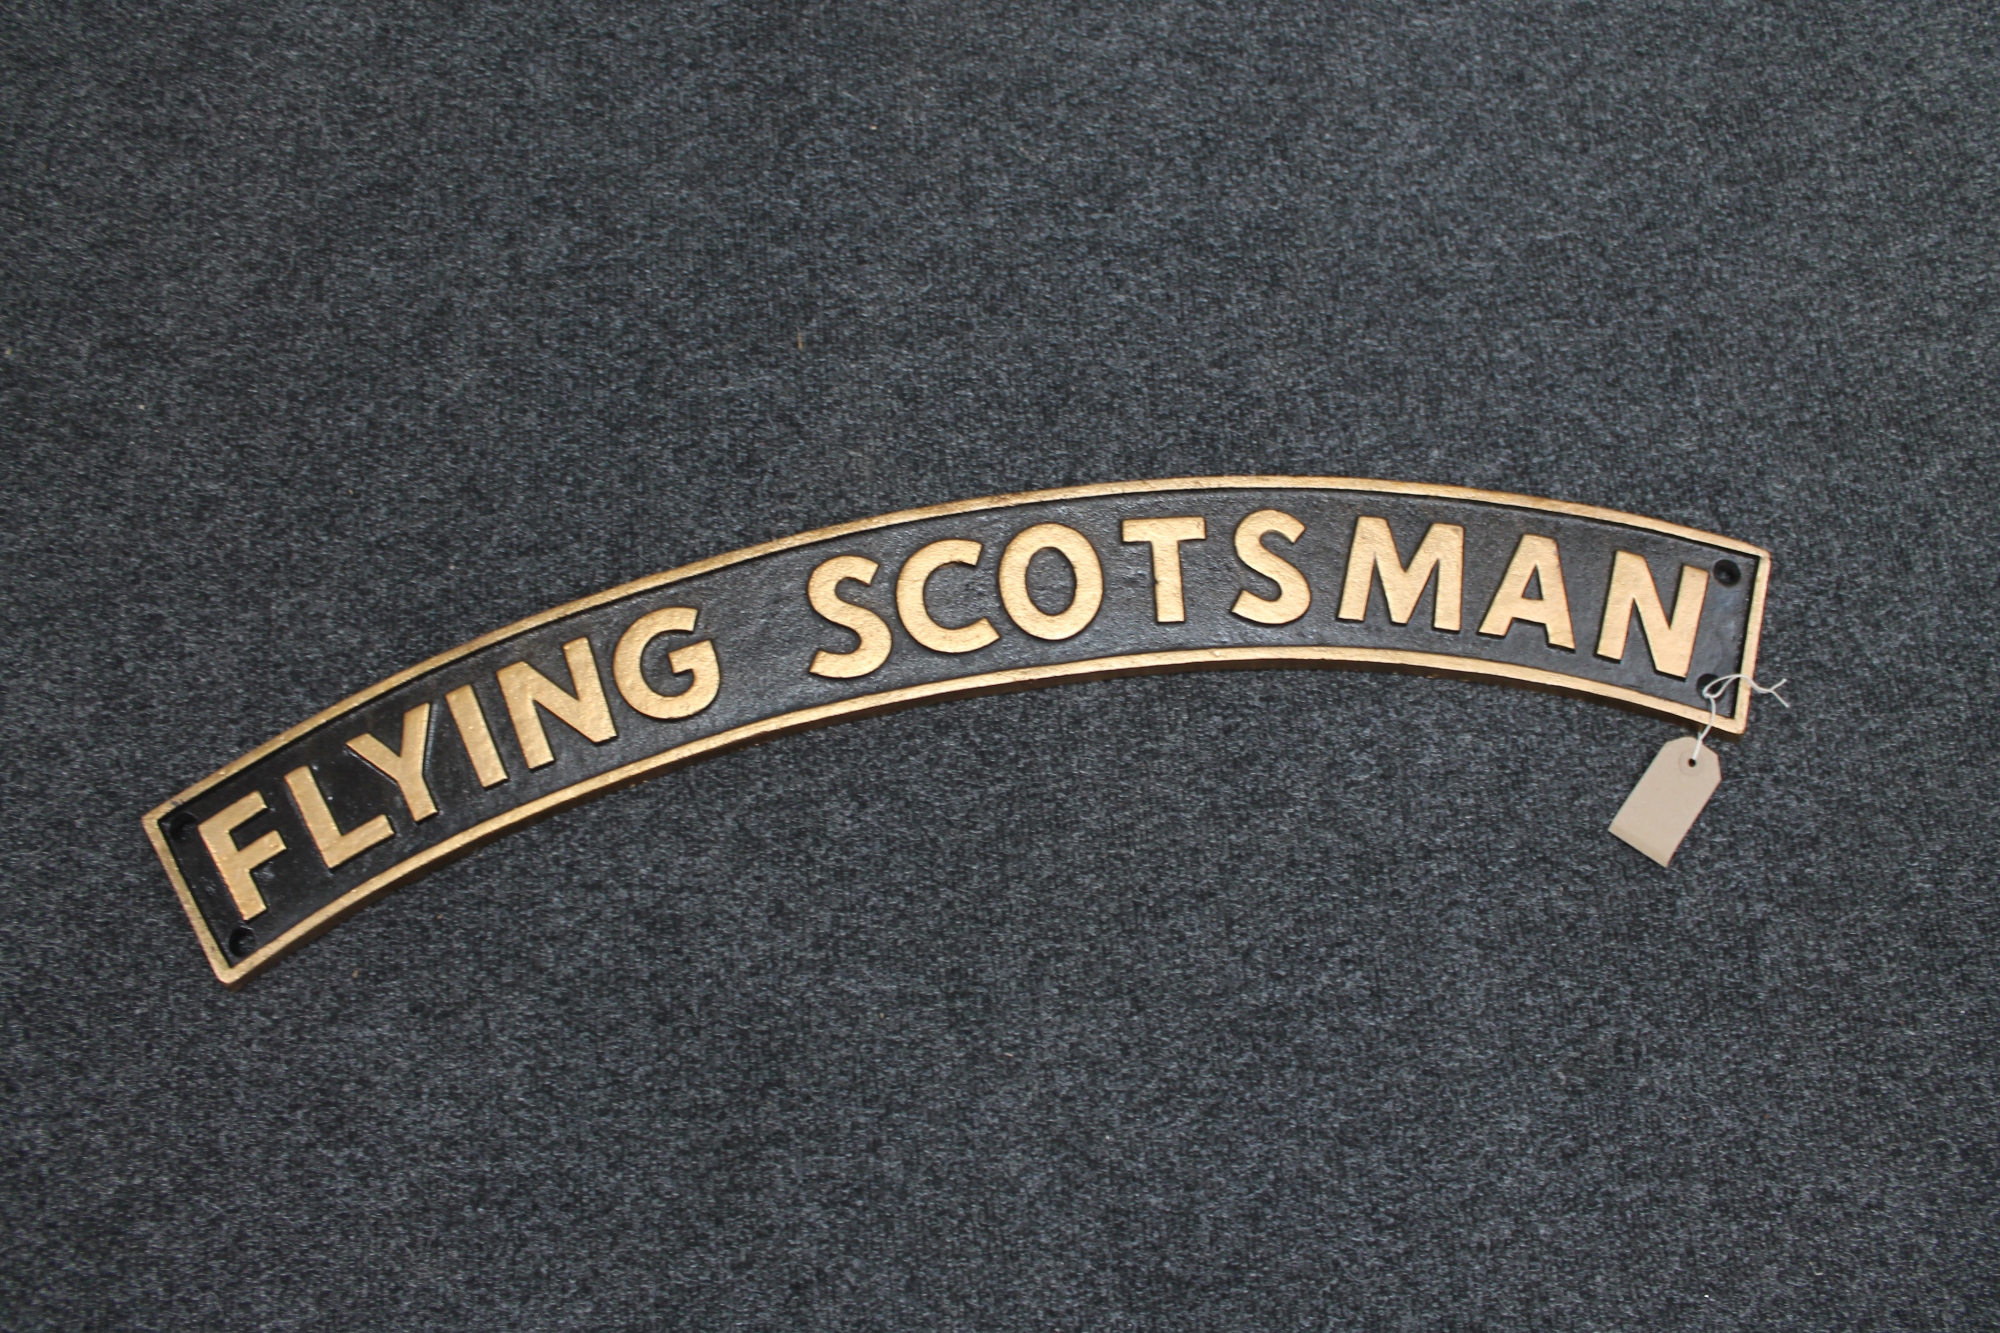 A cast iron plaque The Flying Scotsman